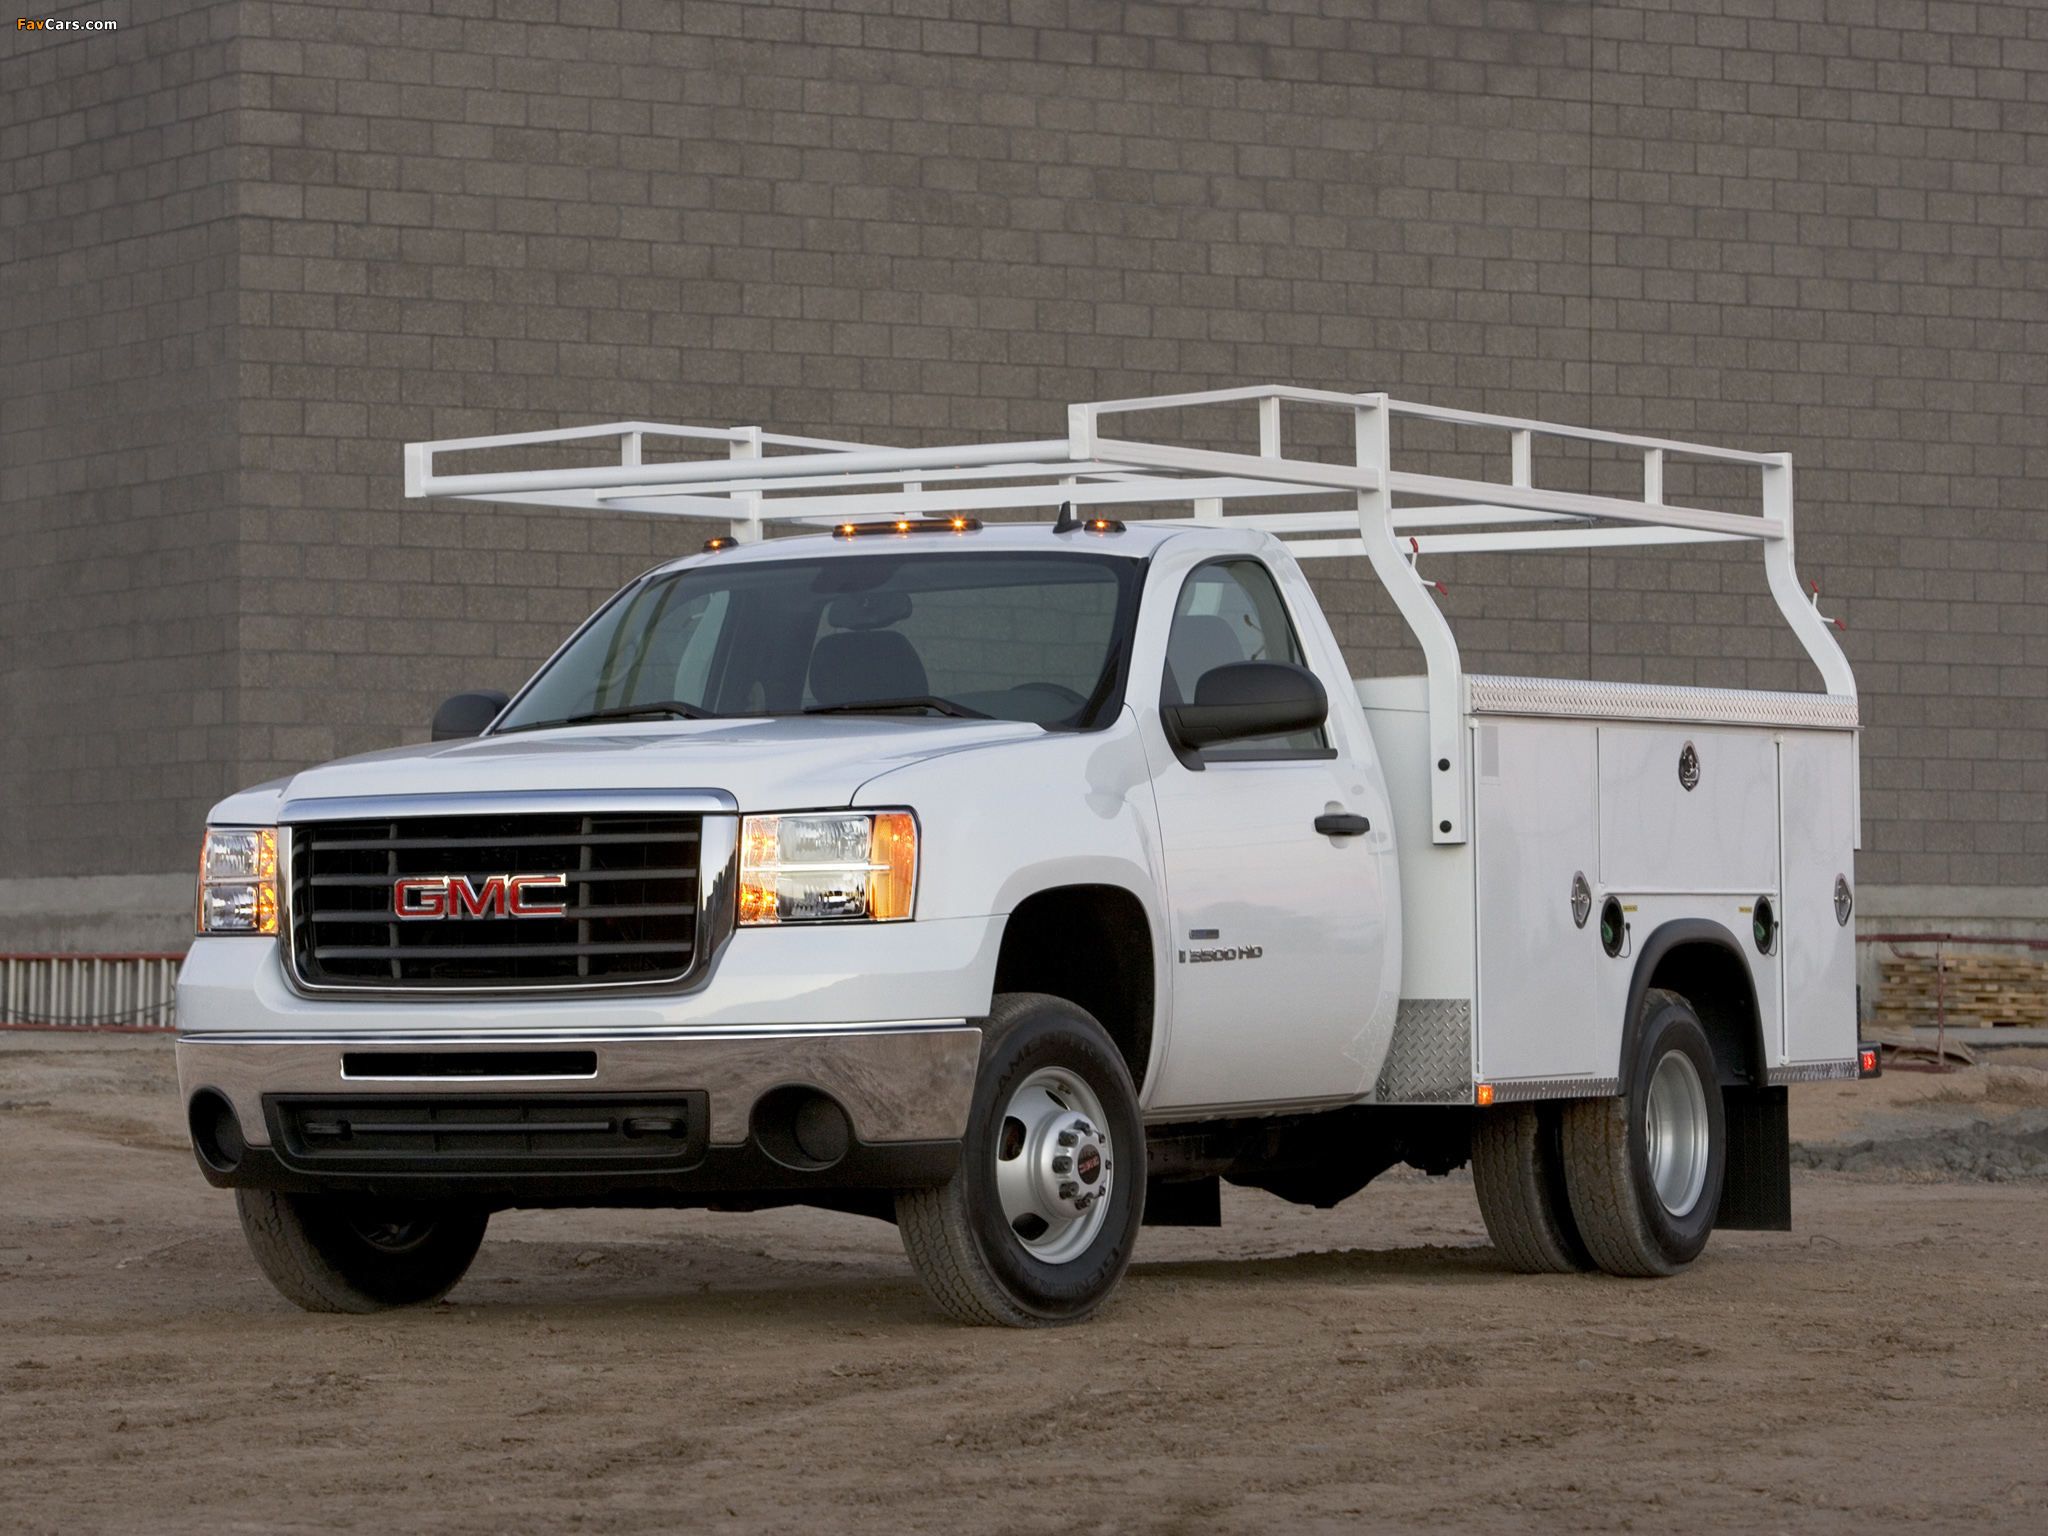 Pictures of GMC Sierra 3500 HD wService Utility Body 2008 (2048 x 1536)